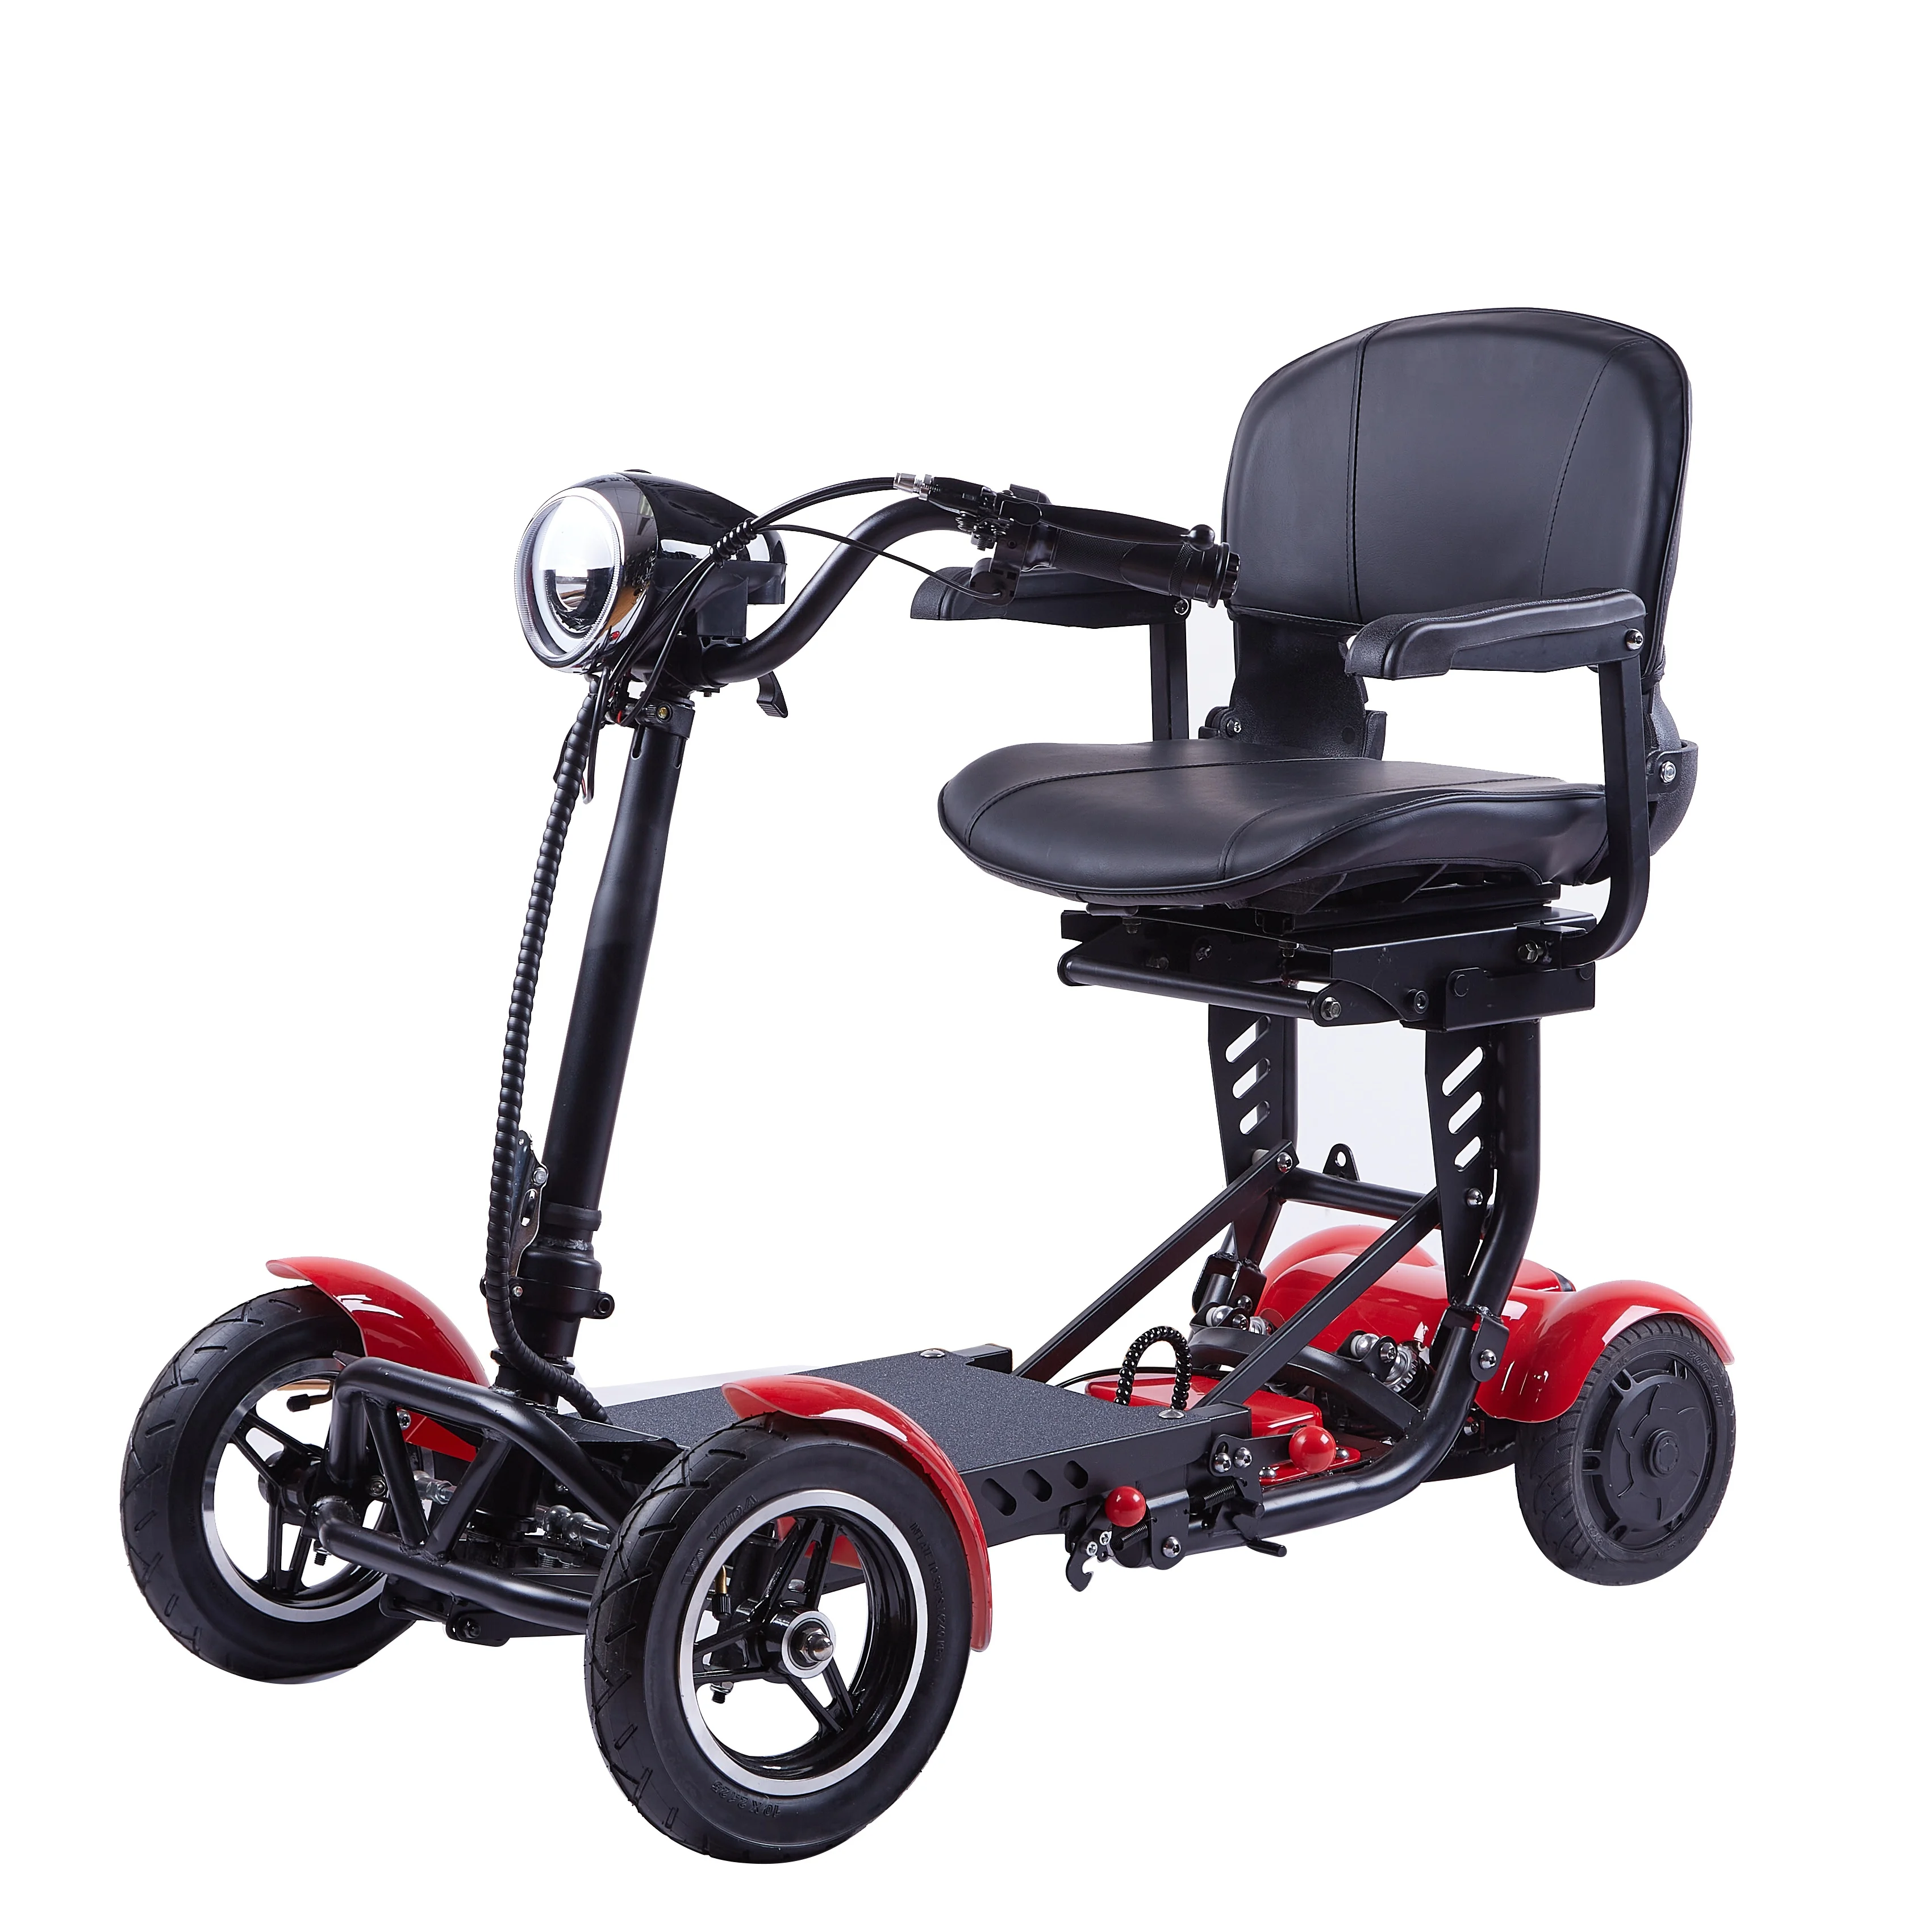 Electric Tricycle 4 Wheel Electric Scooter China Manufacturer Elderly Adult Folding Scooter 12 Inch Sine Wave Motor zc16 inch tri wheel bike middle aged and elderly human pedal scooter hemiplegia rehabilitation leisure shopping cart